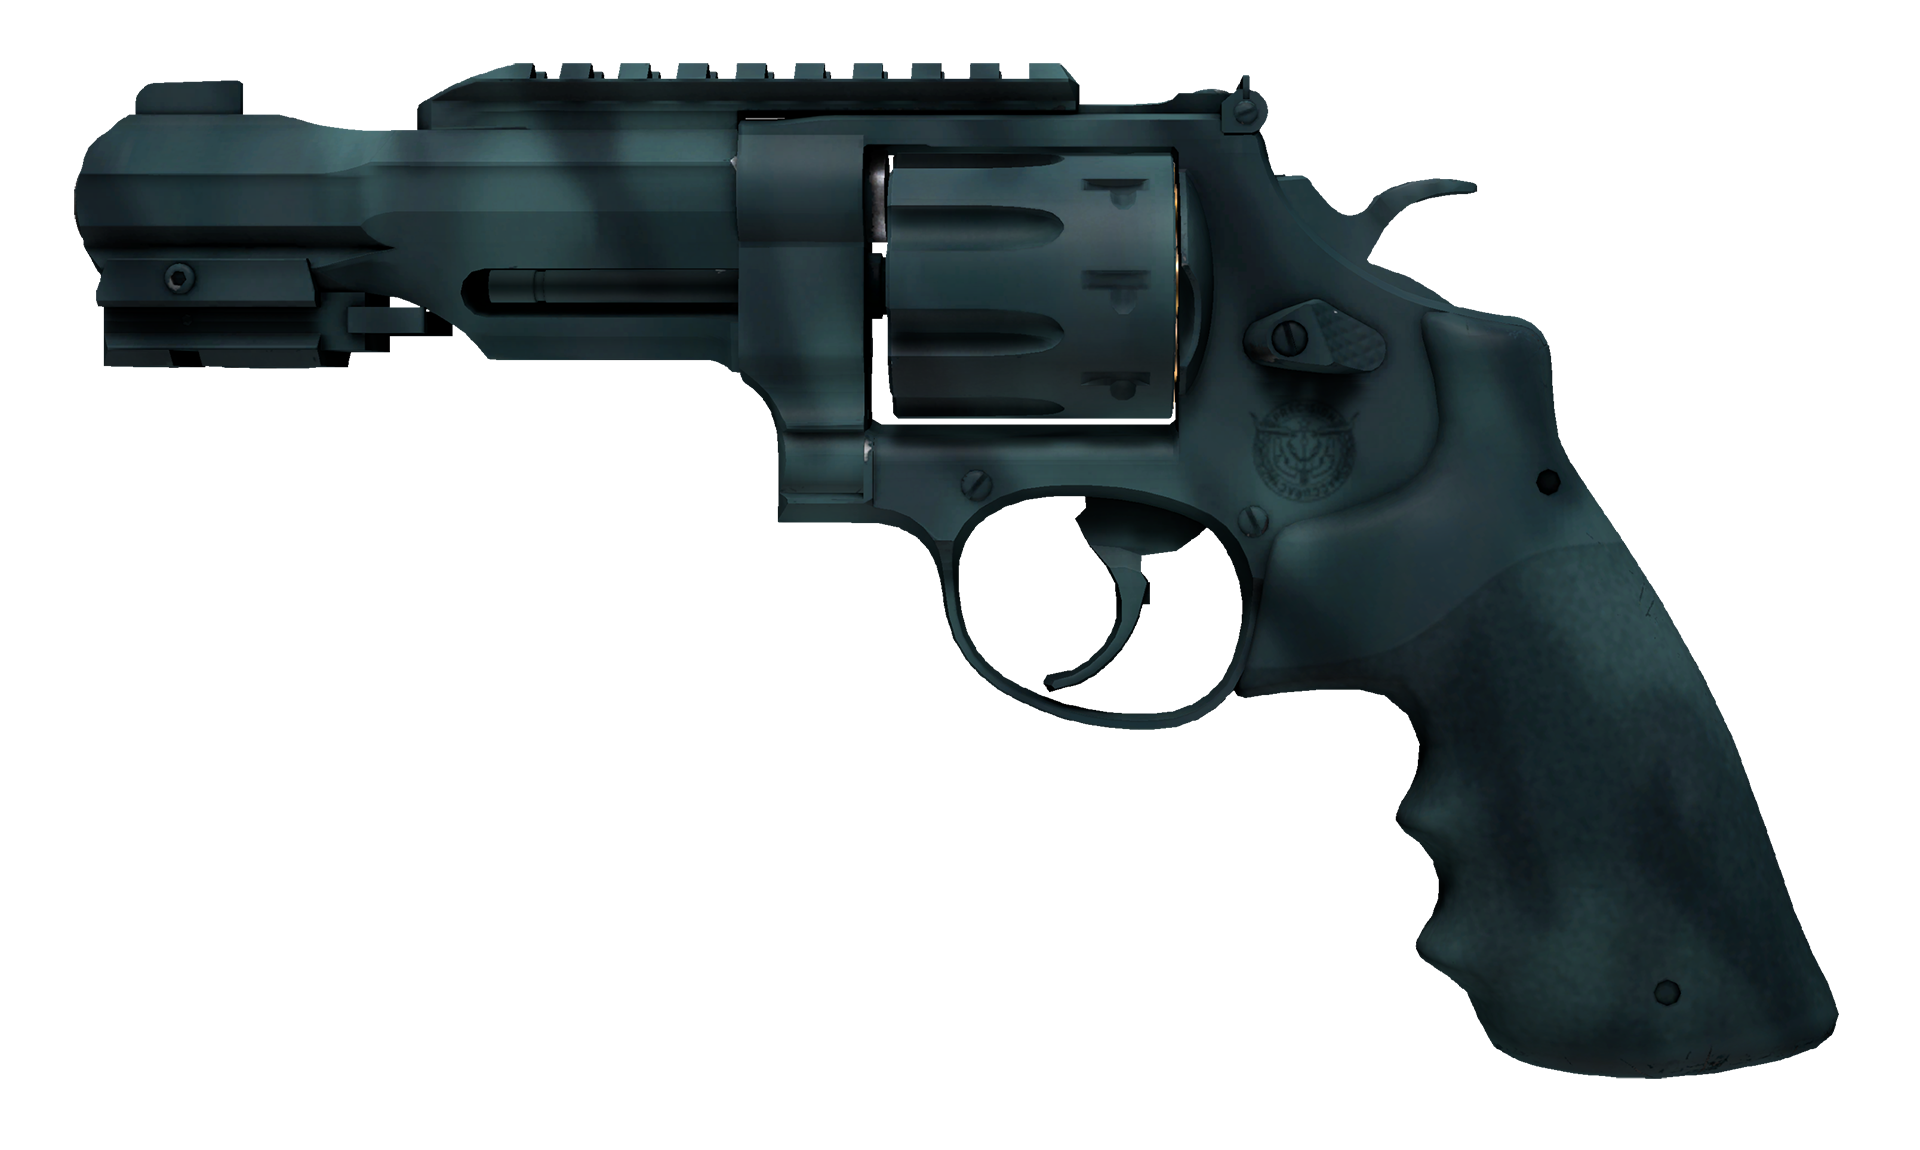 R8 Revolver Canal Spray cs go skin for apple download free